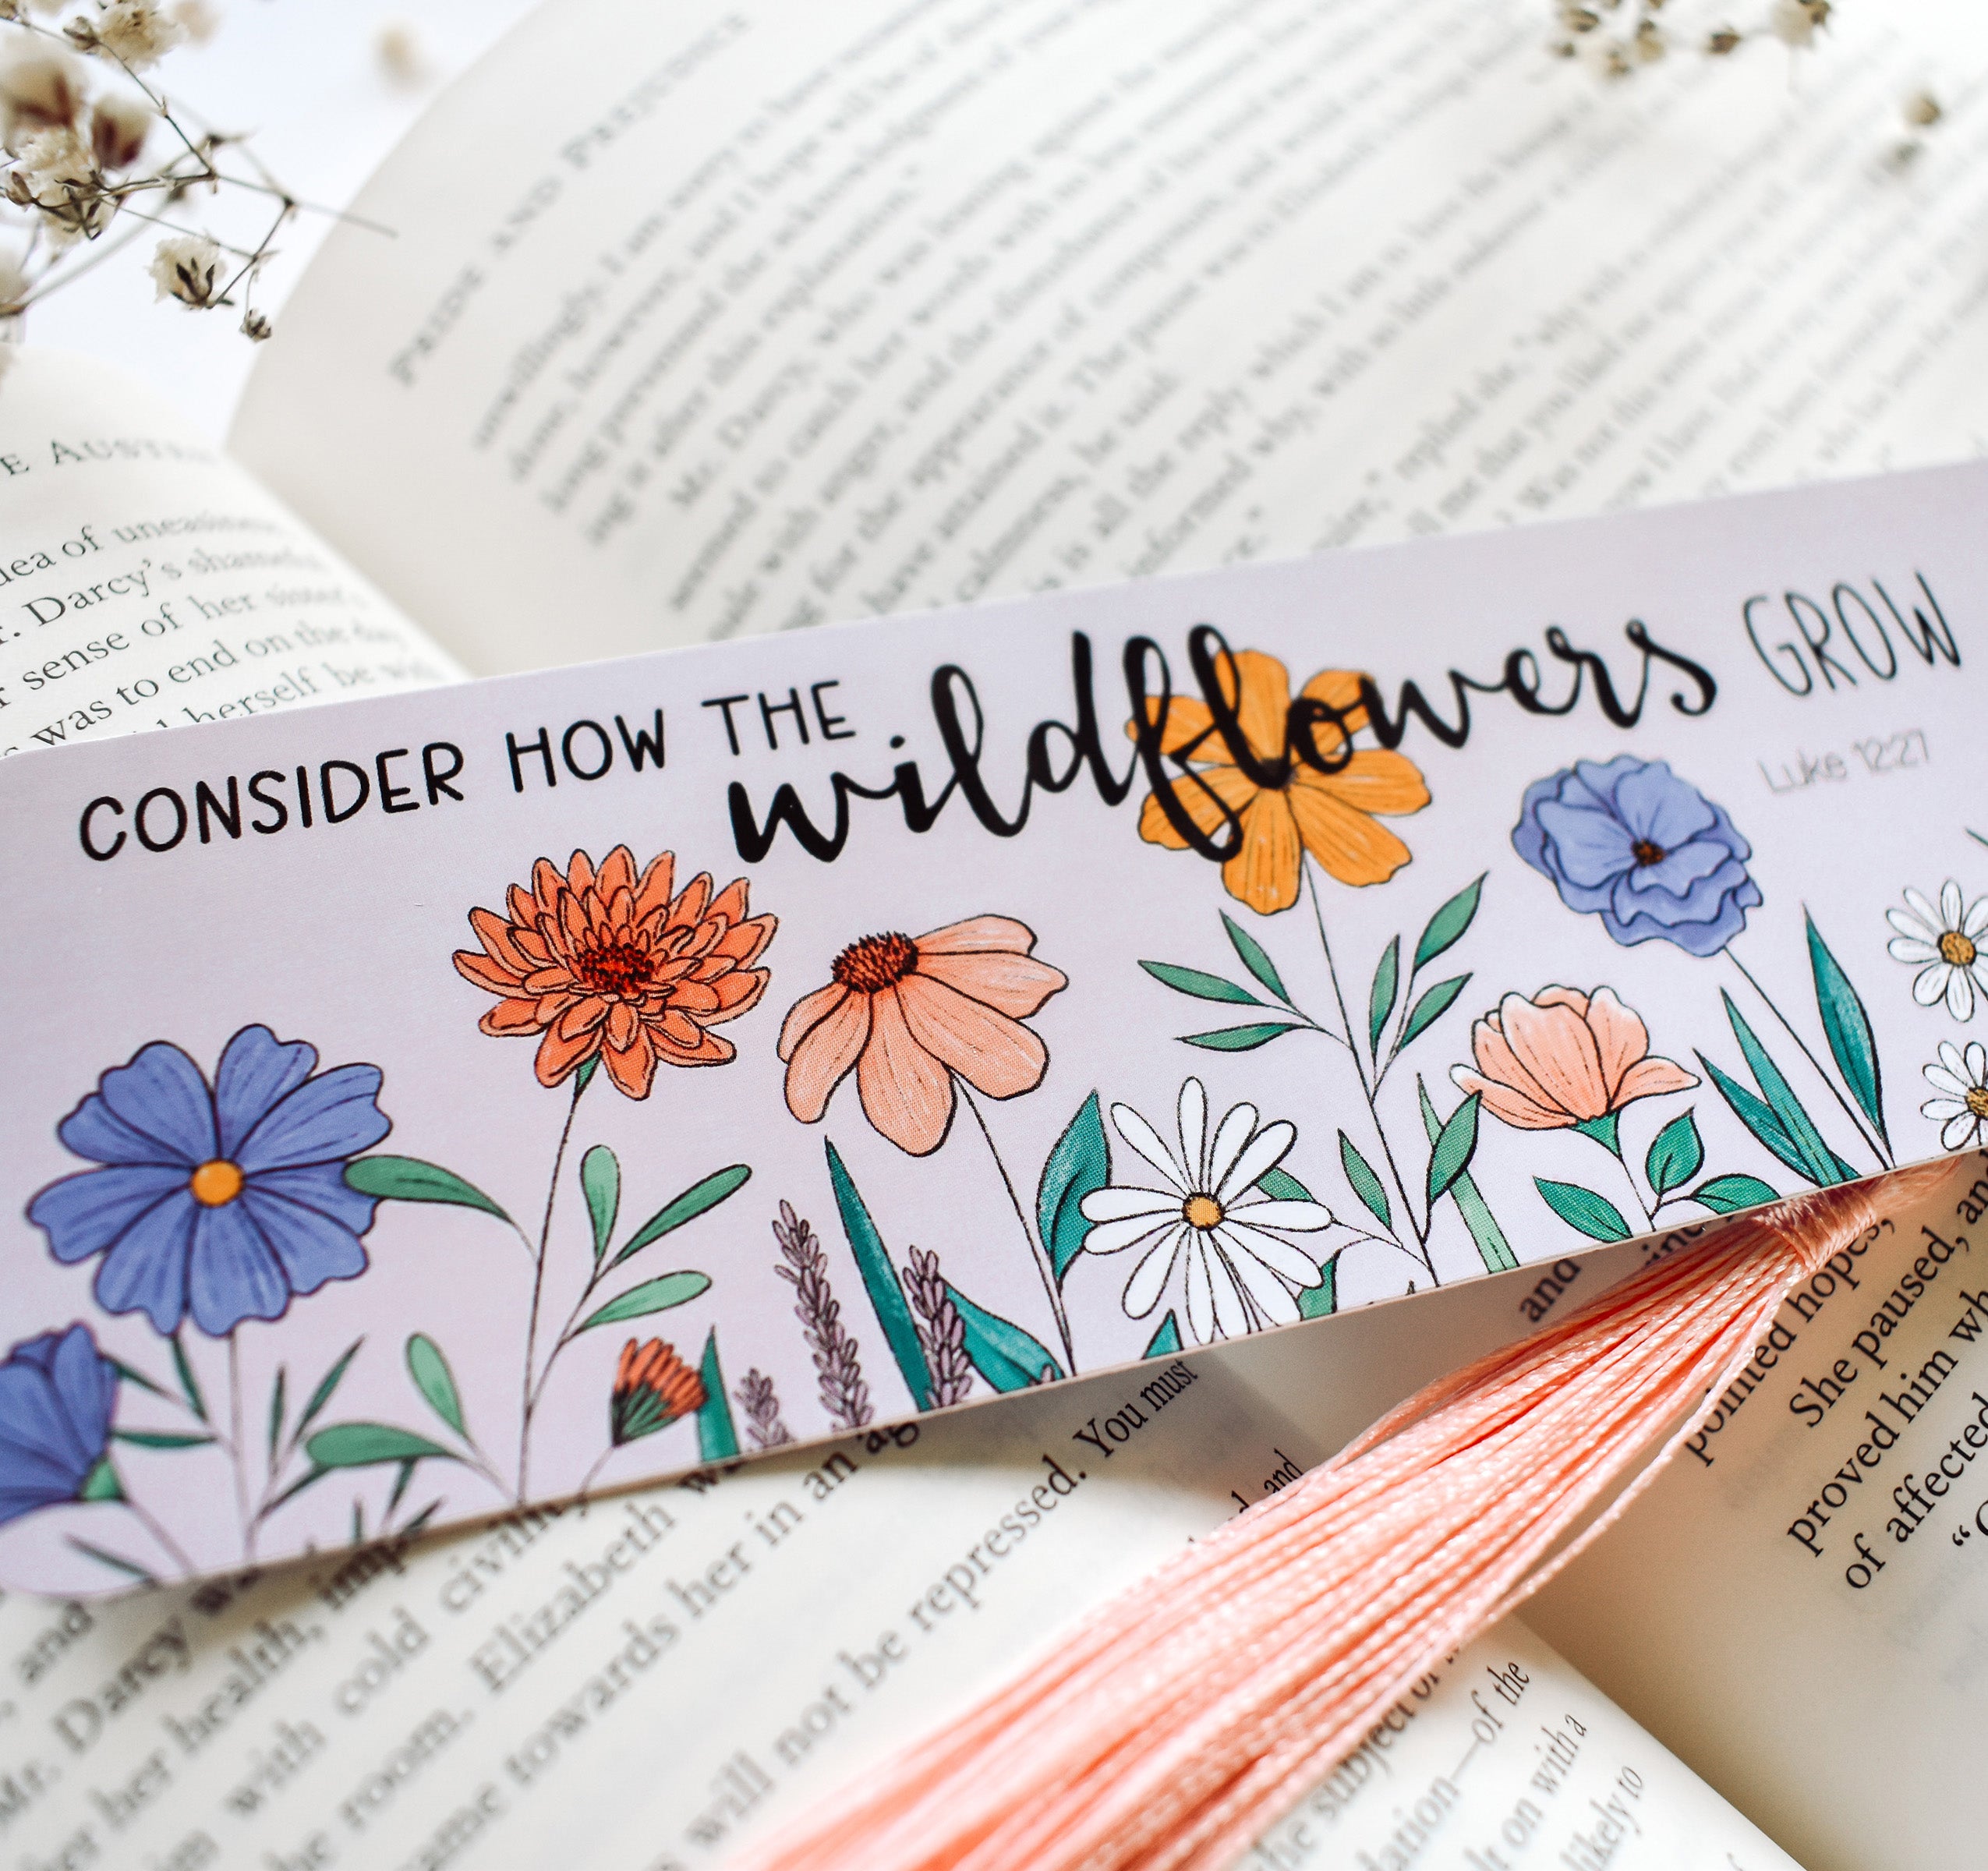 Christian Luke 12:27 Bible verse bookmark with flowers and a pink tassel